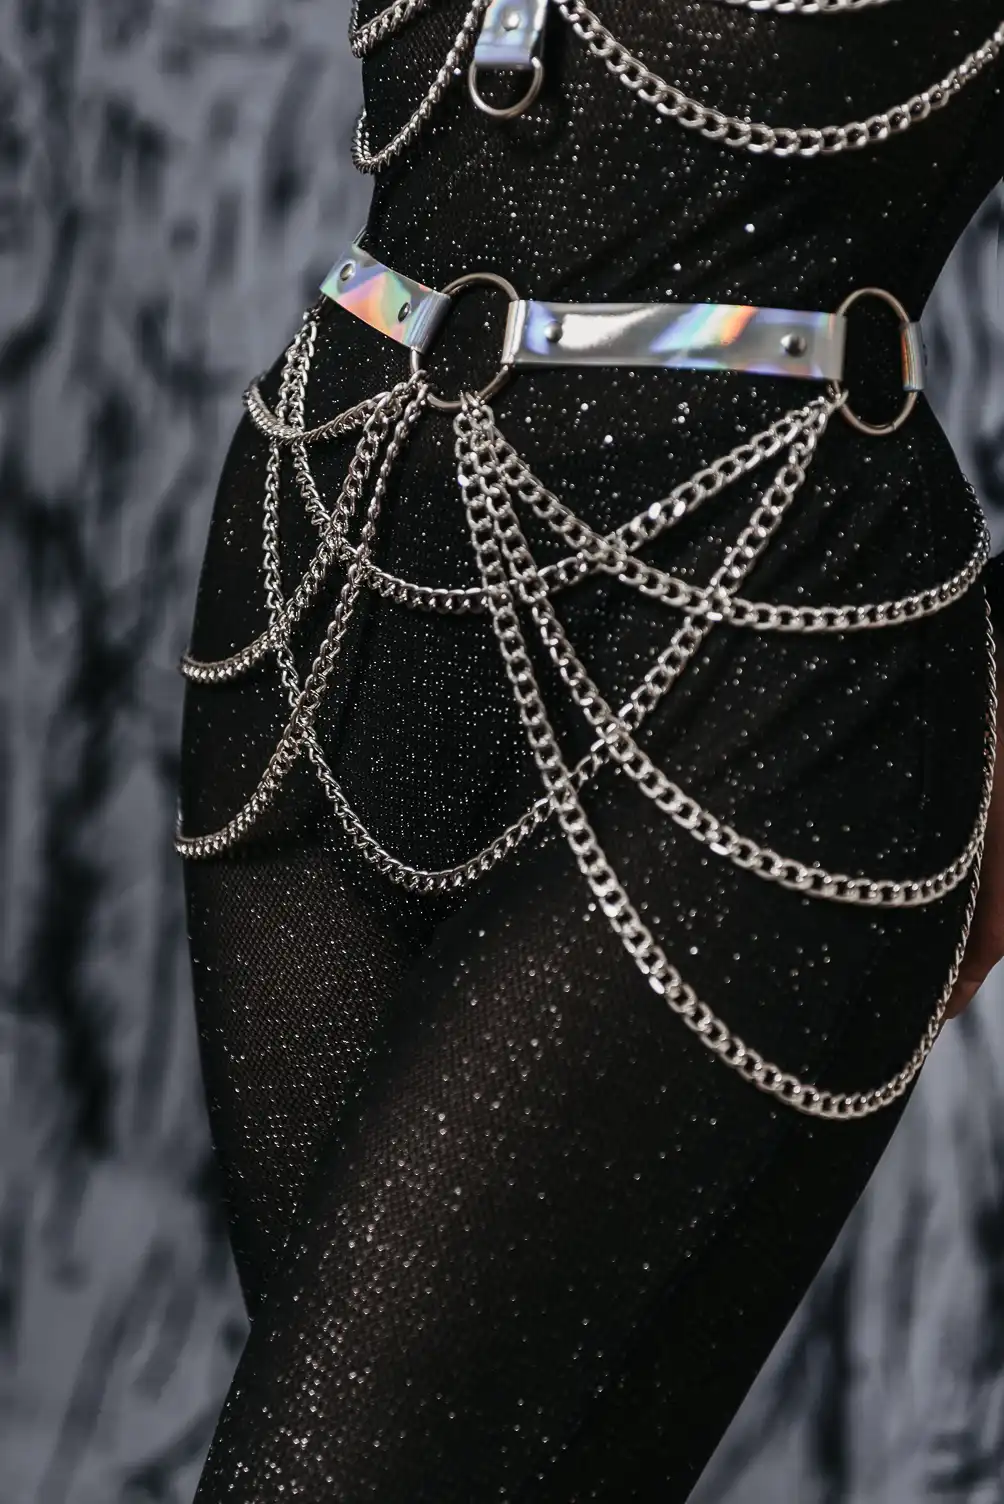 Handmade Alien leather belt with chains. High-end natural Italian leather with hologram color.